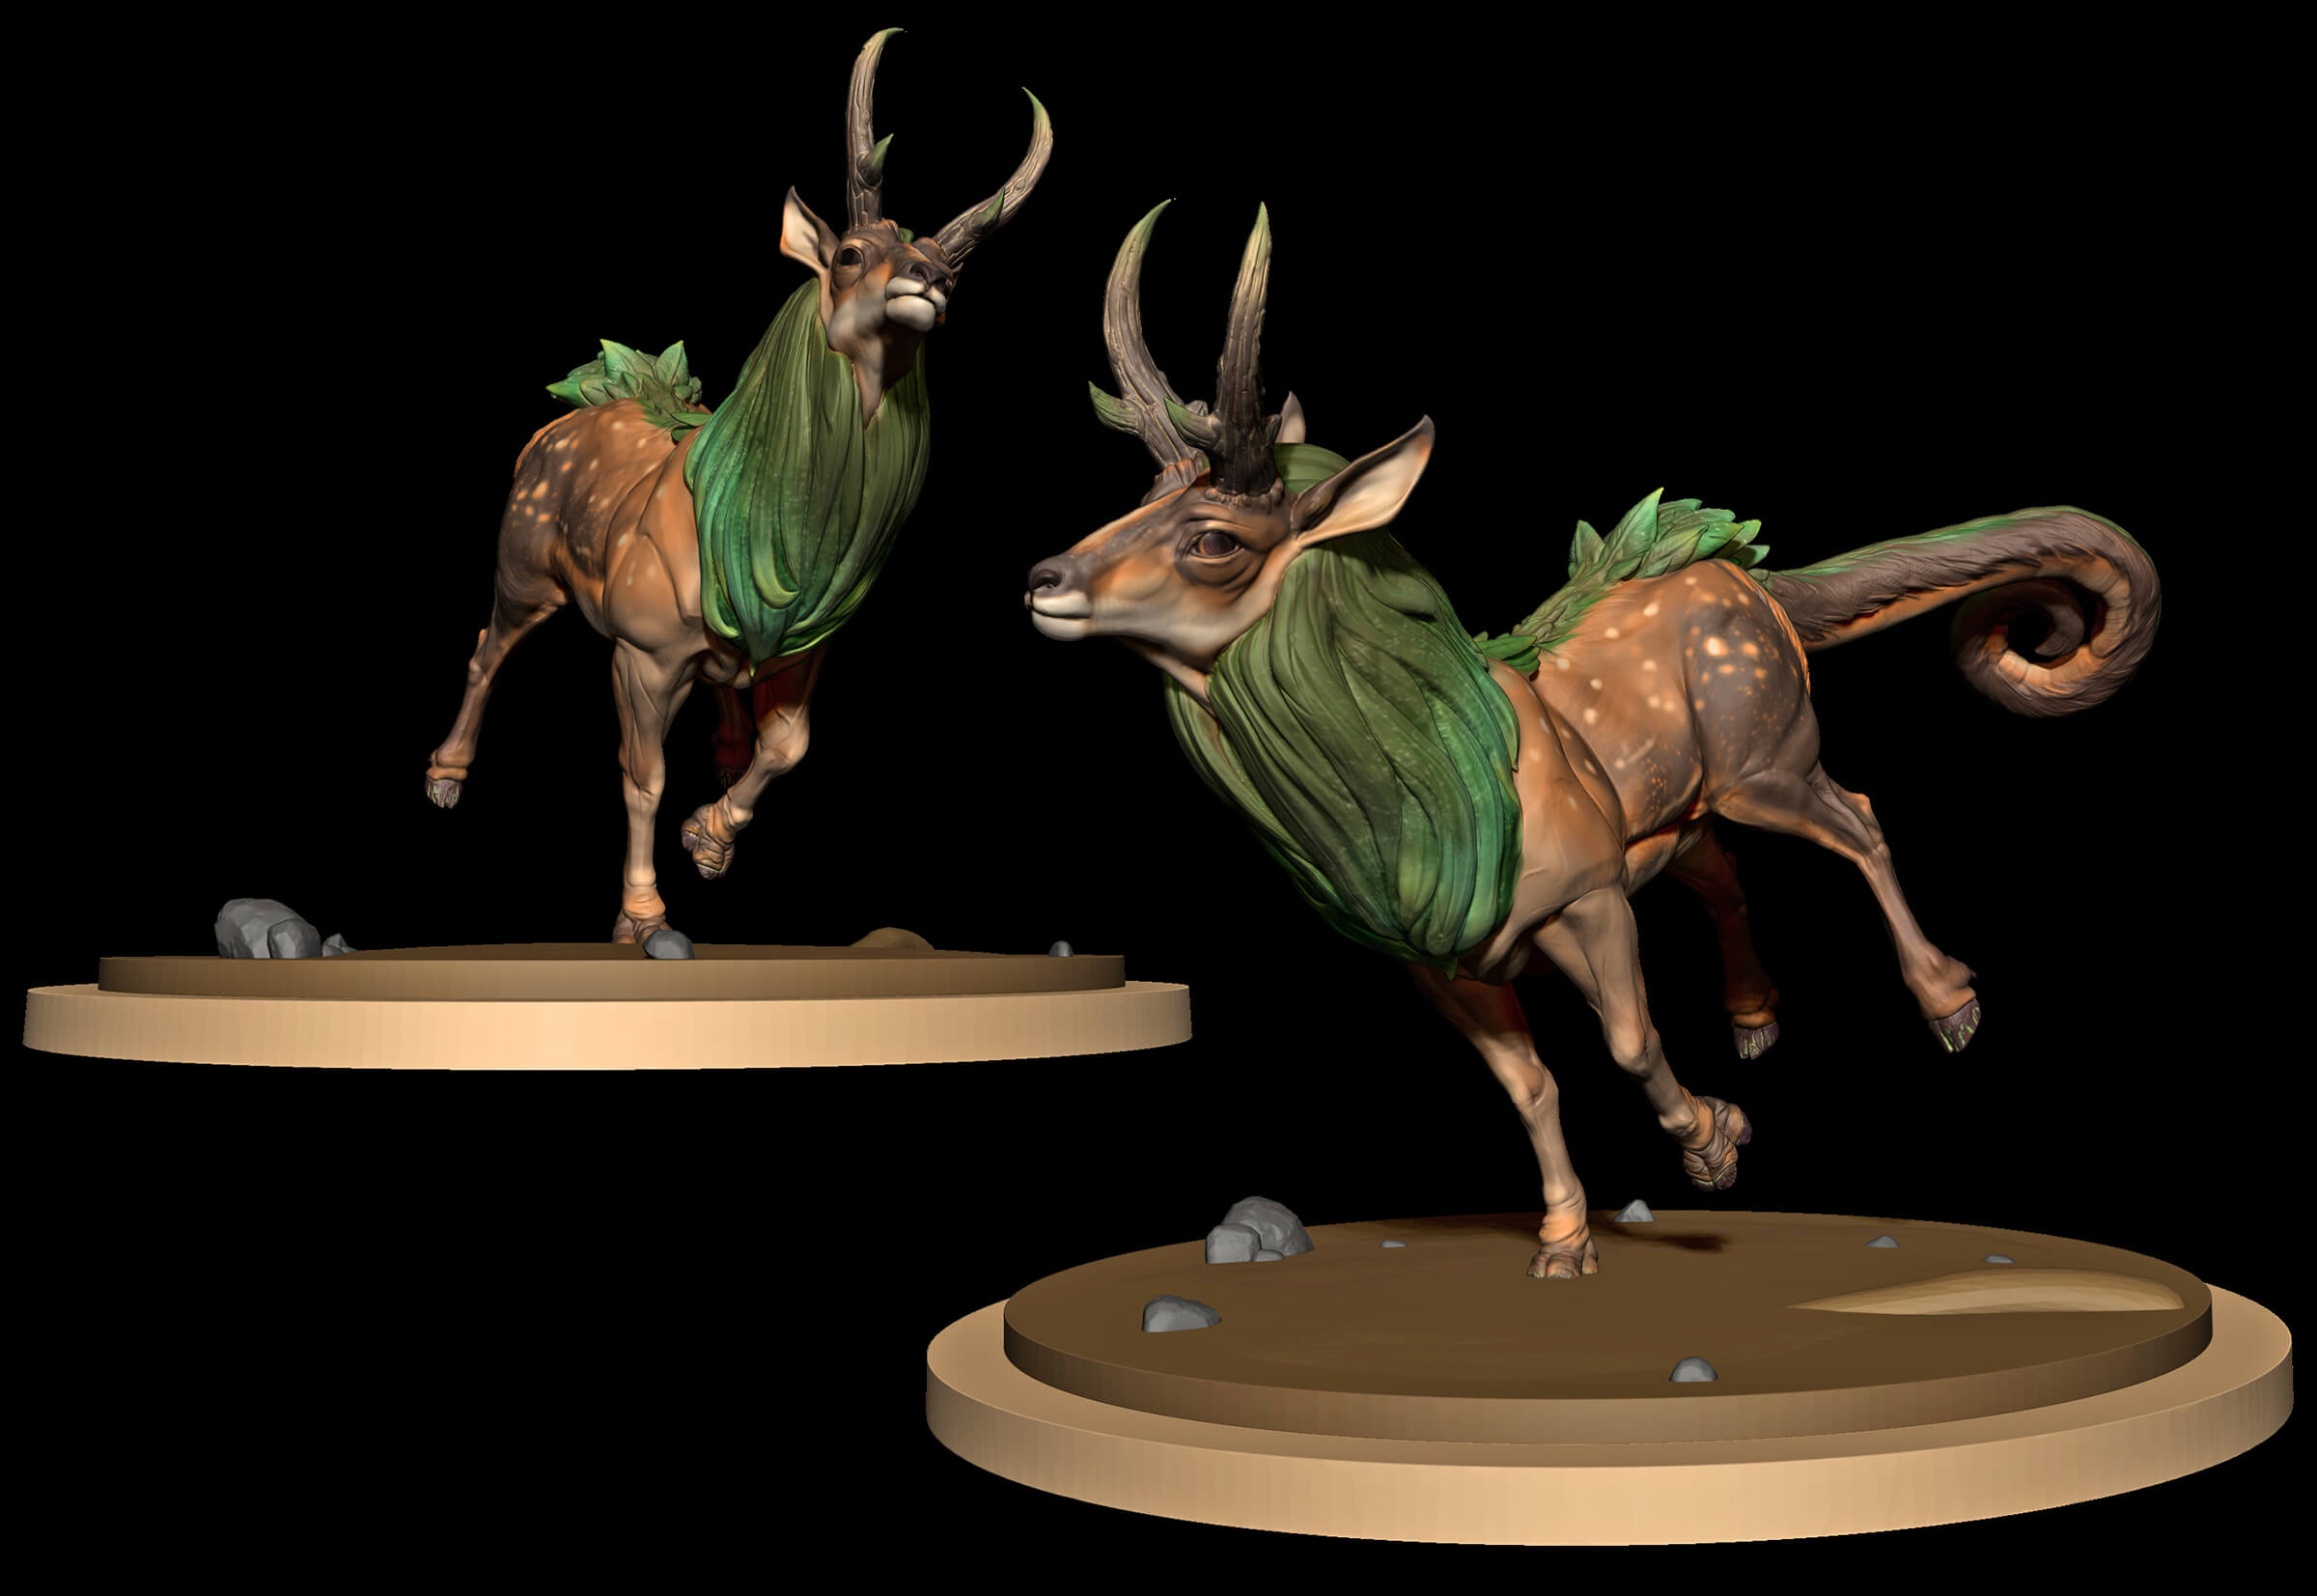 computer-generated 3D models of a deer-like creature with a green mane and long, thick tail in mid-run